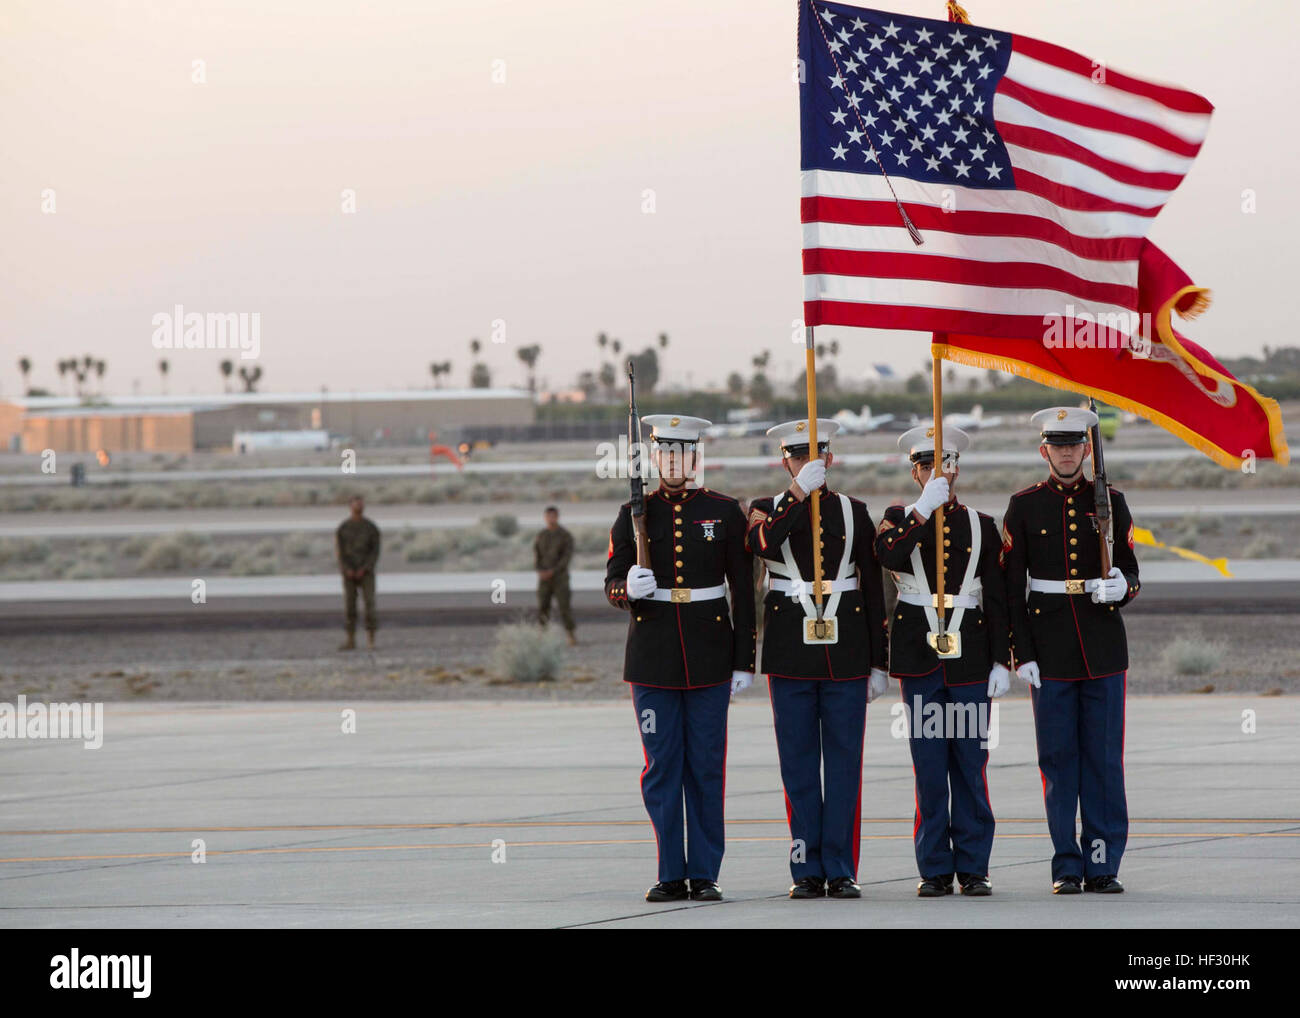 As part of the annual Yuma Airshow, the Marine Corps Air Station Yuma, Ariz., color guard carry the colors during the Twilight Show’s national anthem at the station flight line, Friday, Feb. 27, 2015. MCAS Yuma Twilight Show 150227-M-HL954-081 Stock Photo